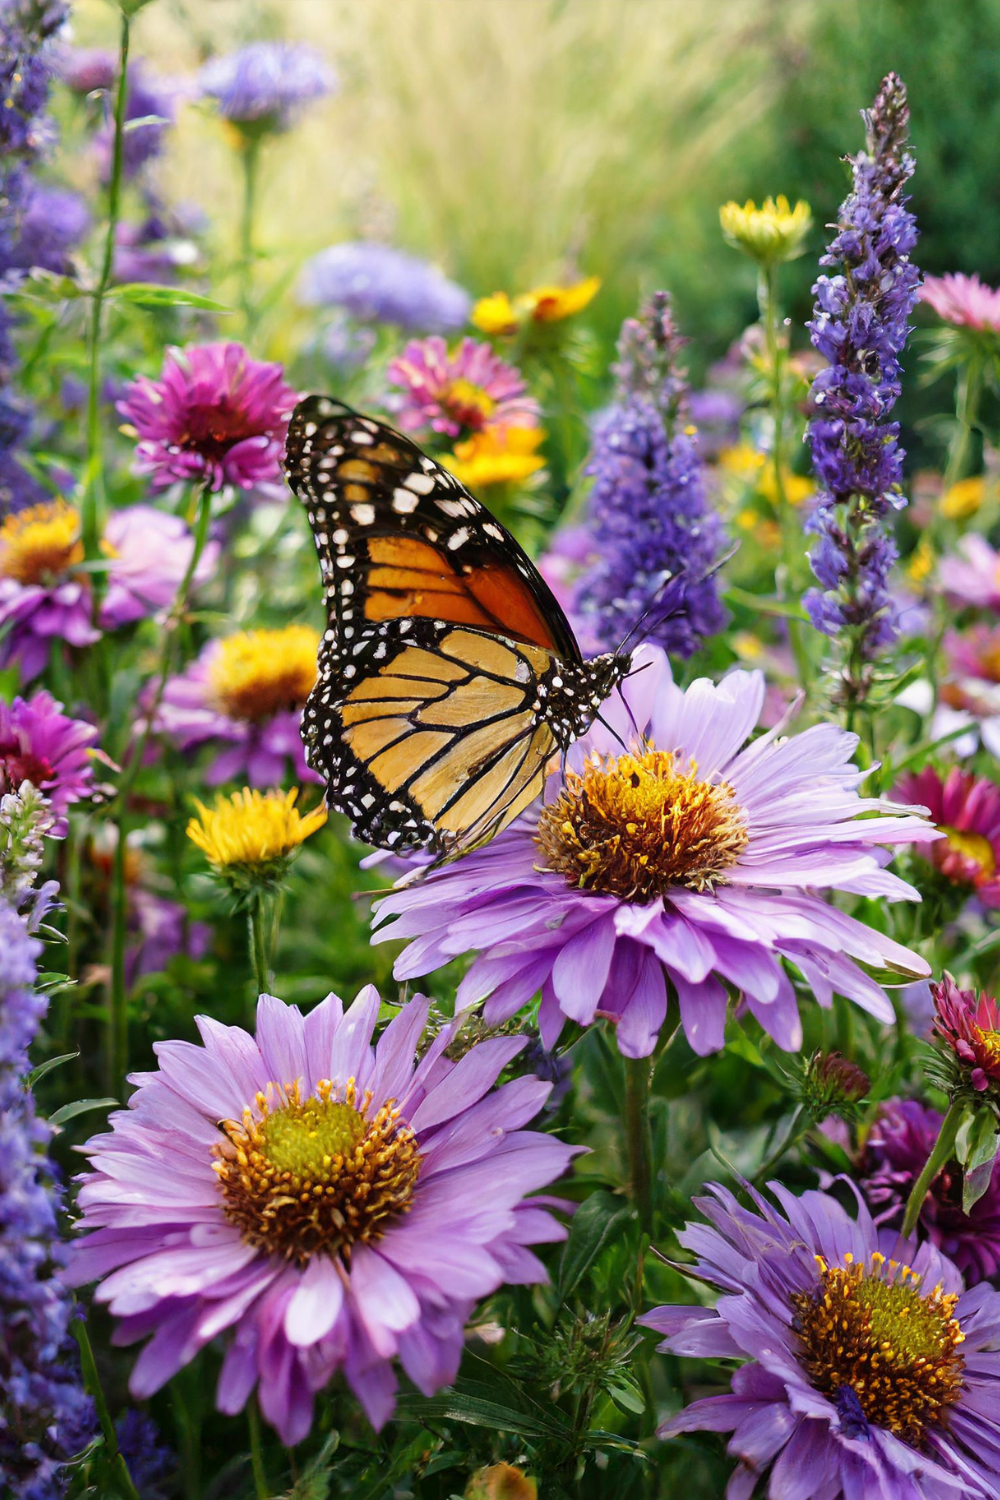 Butterfly and aster flowers